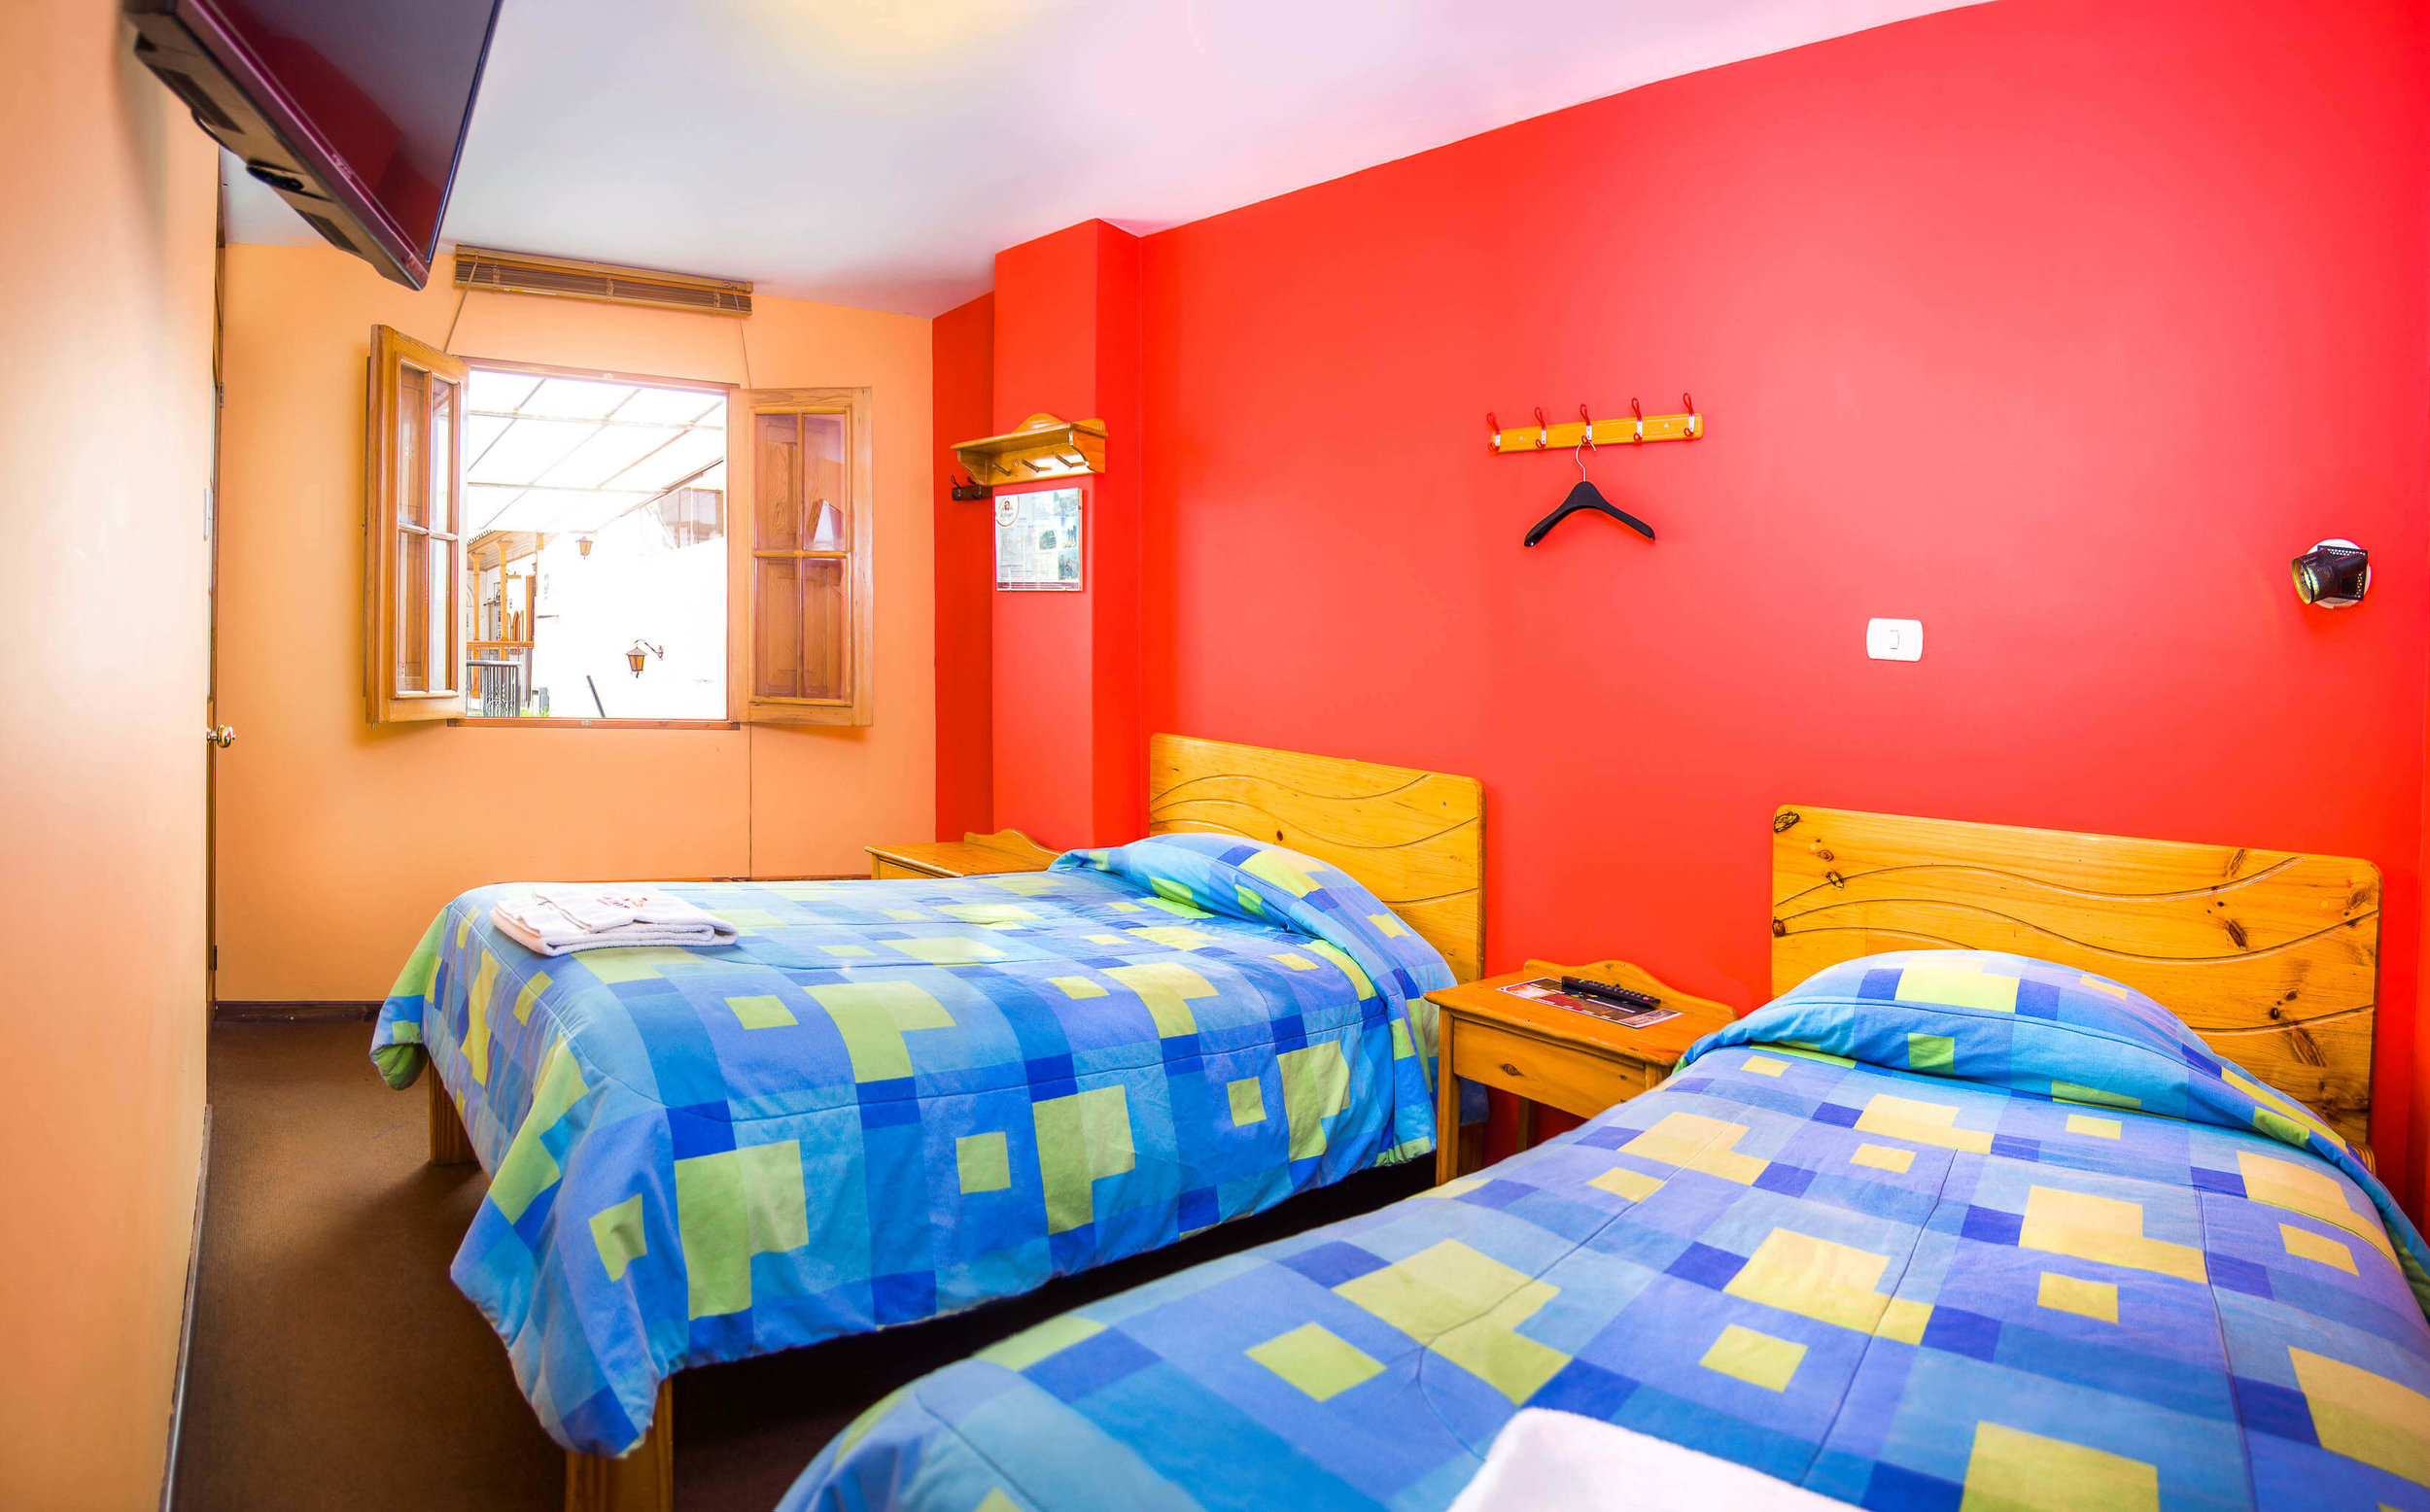  Our Comfortable   Rooms    Book Them with Us  